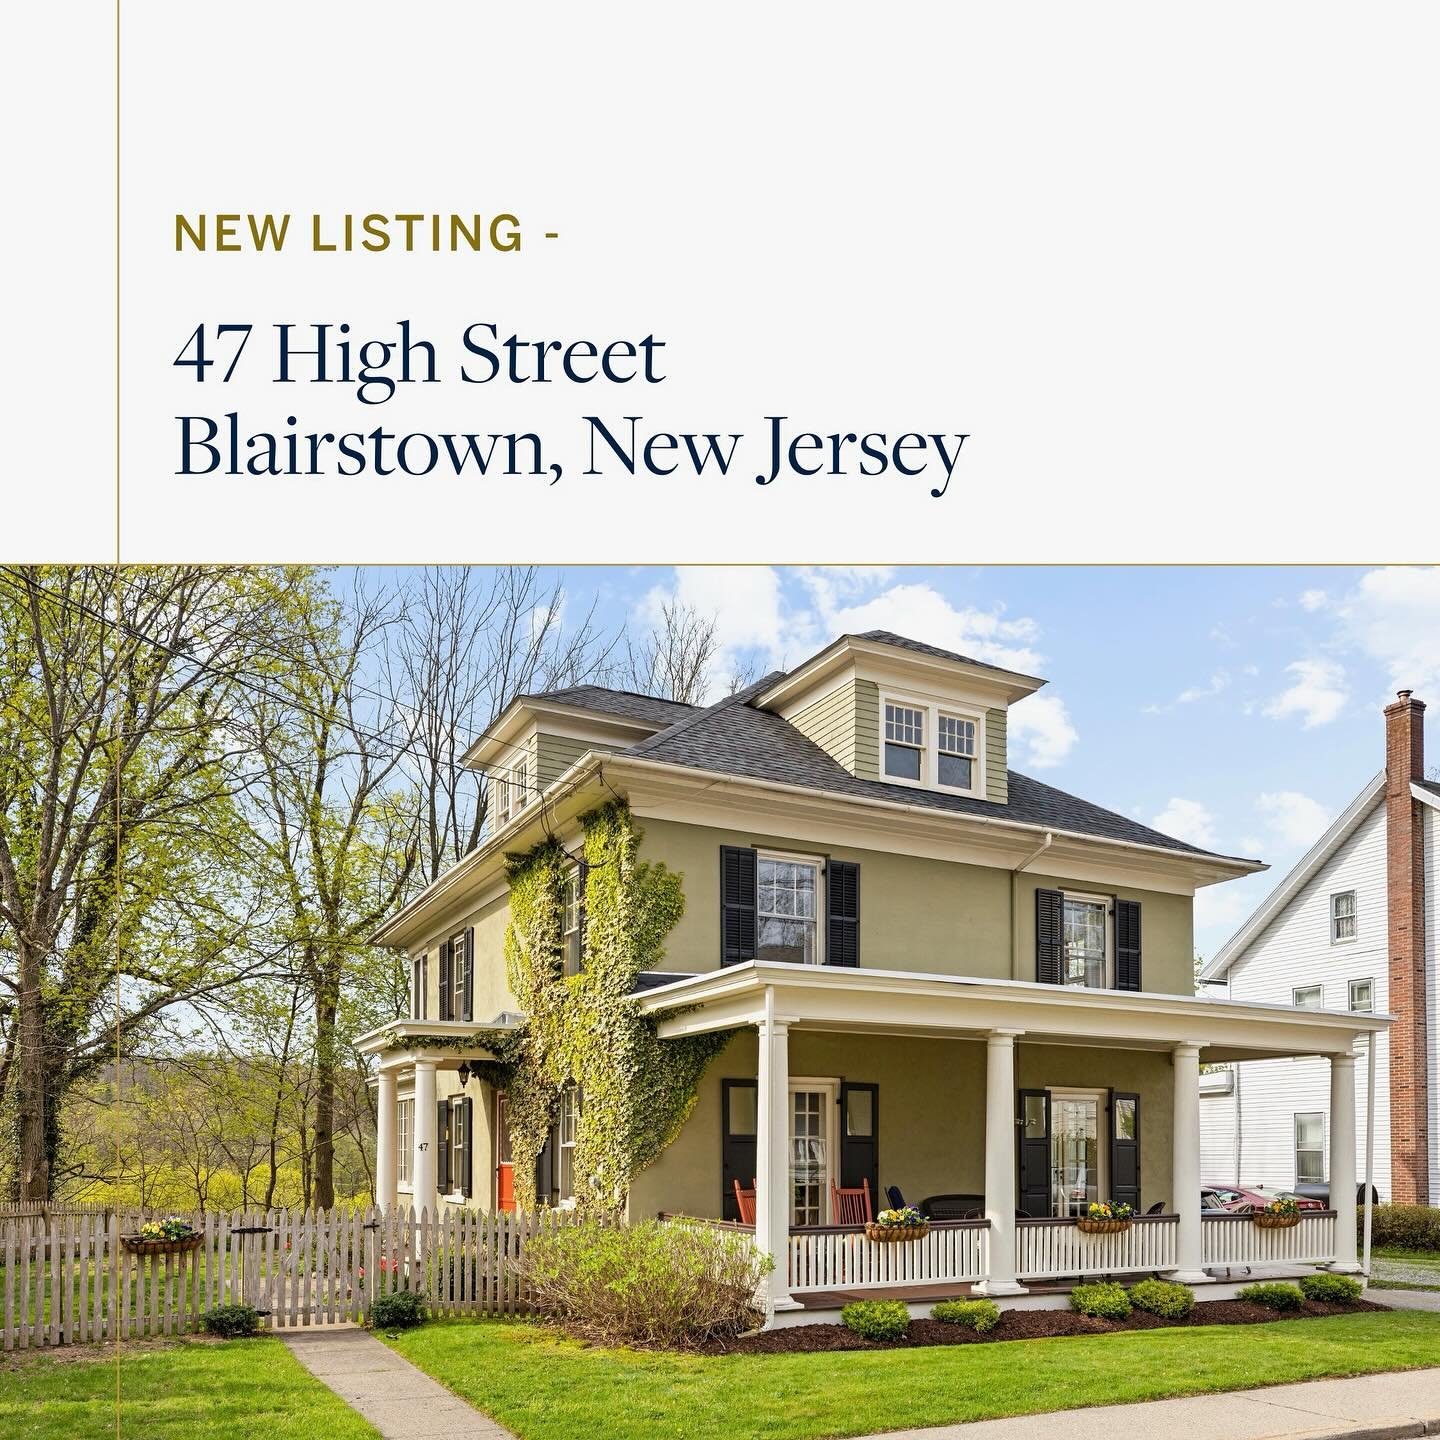 New listing alert! 🚨 47 High Street in Blairstown is officially on the market and being offered at $449,000. Feel free to pop in over the next few days at one of the many Open Houses to take a look:
.
OPEN HOUSE Schedule:
- Thursday, 4/25: 5:00 - 7: